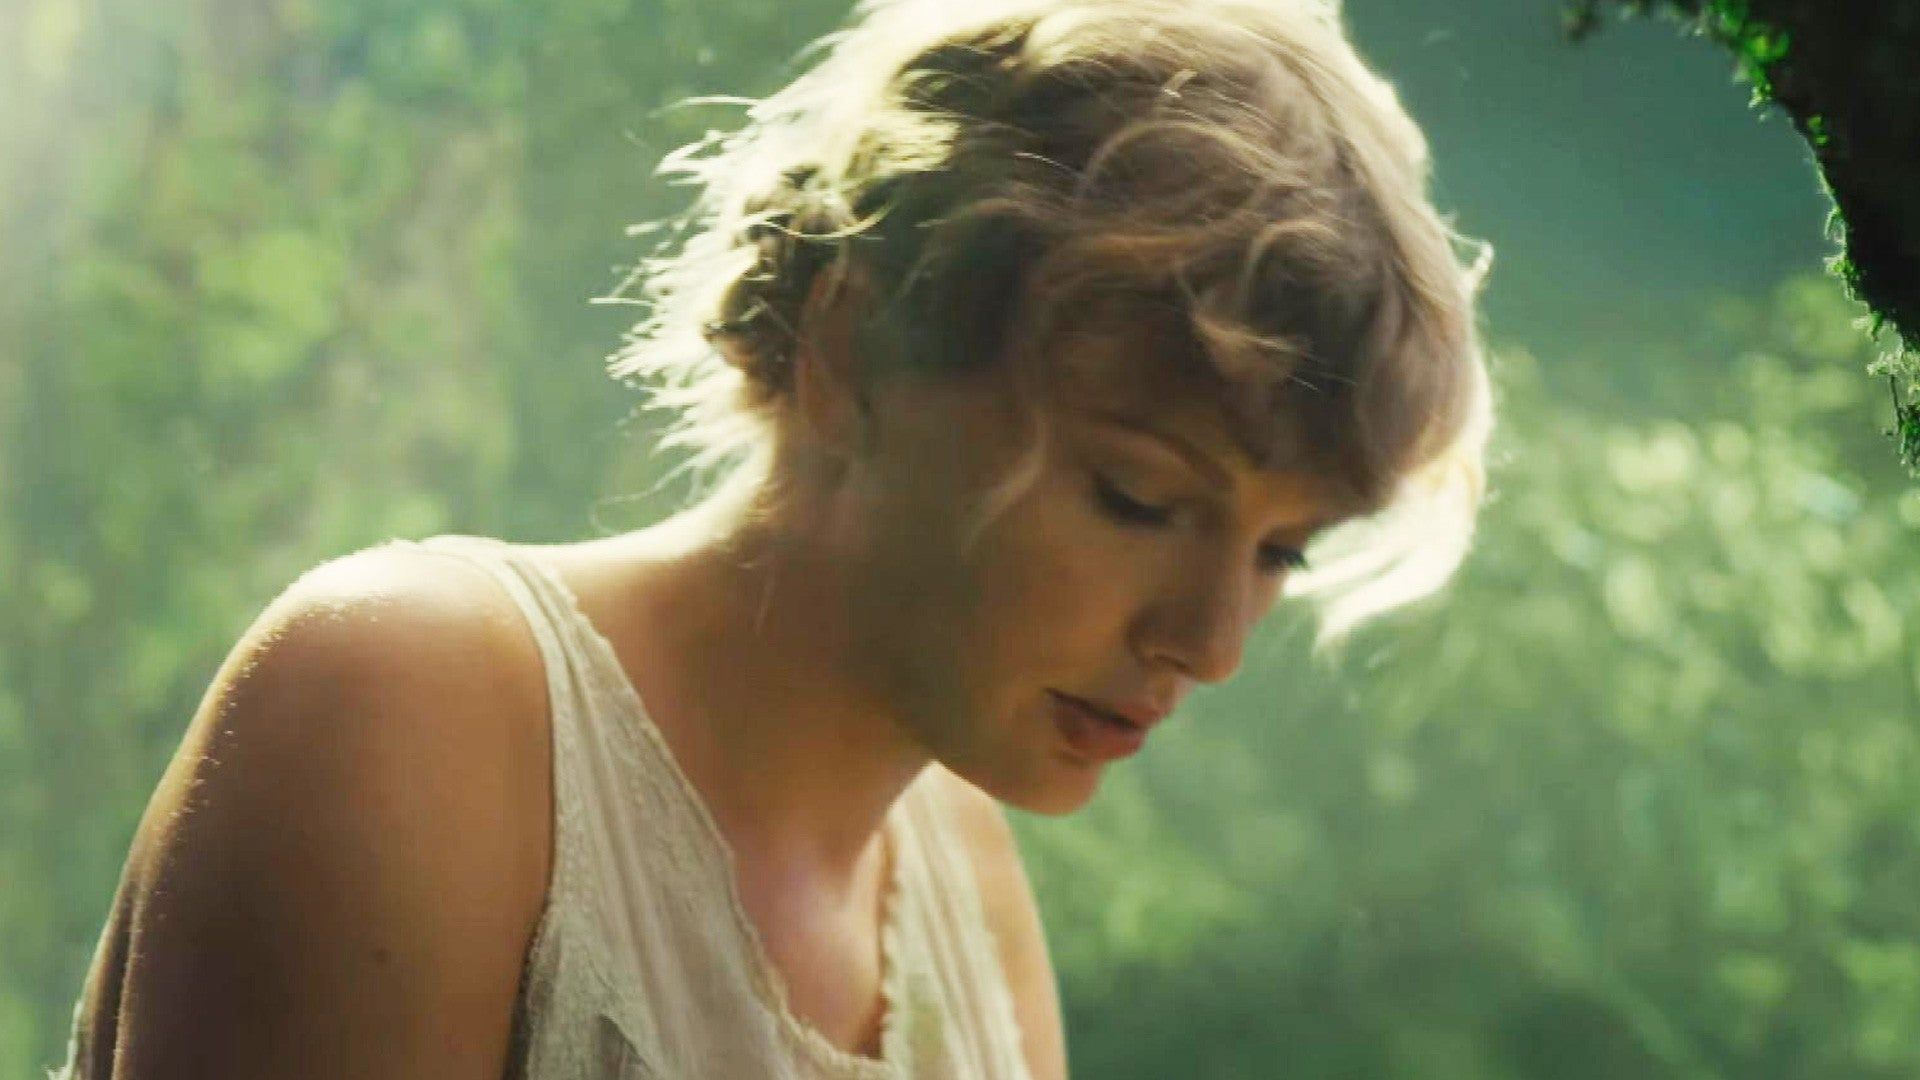 Taylor Swift Folklore Wallpapers Wallpaper Cave